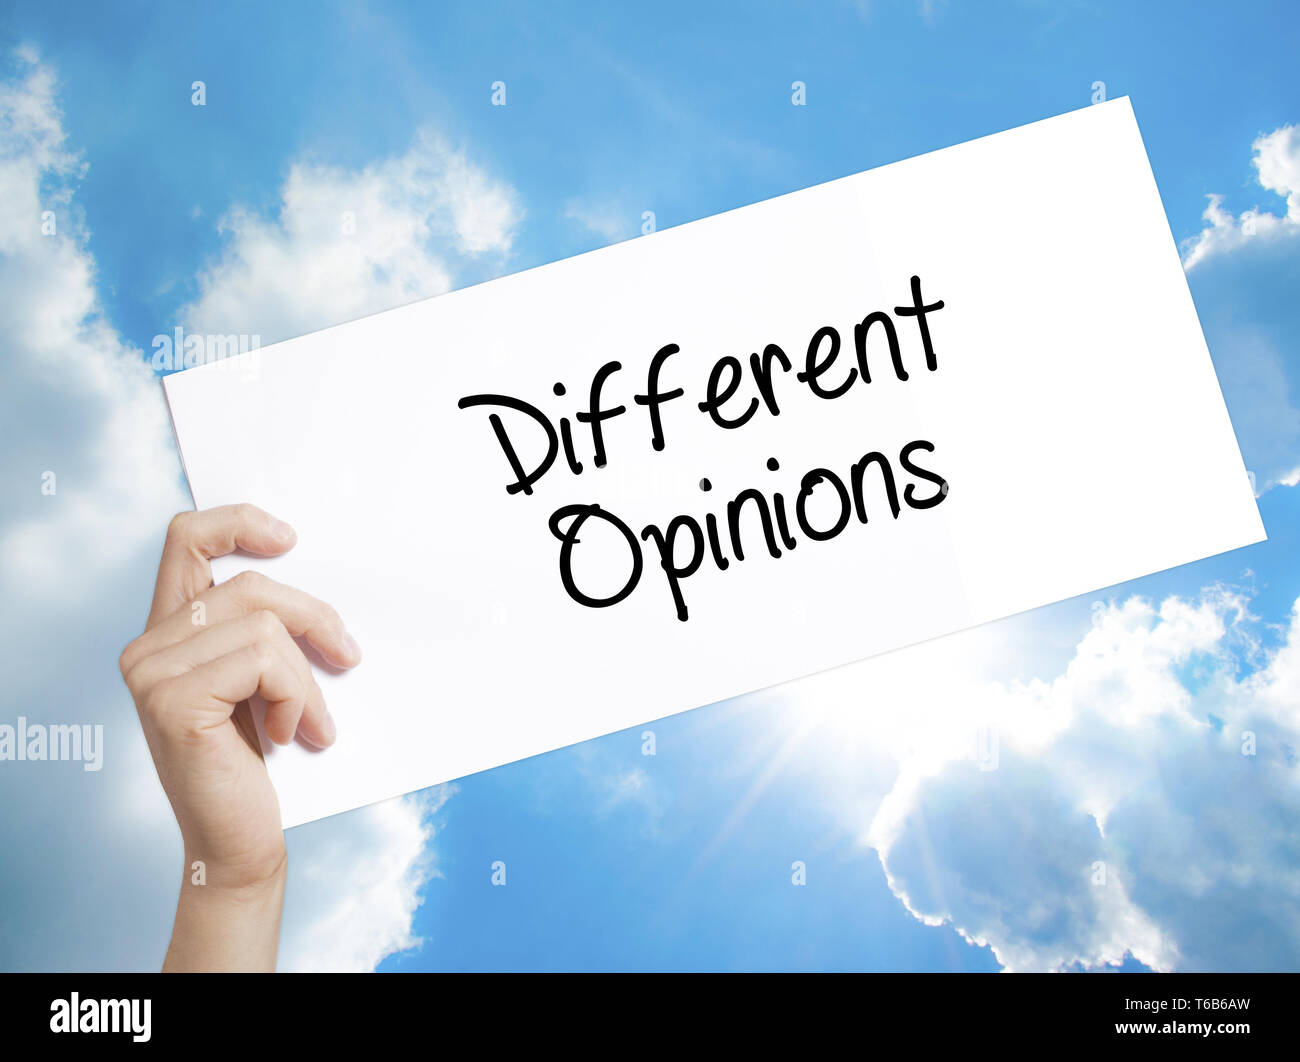 Different Opinions Sign on white paper. Man Hand Holding Paper with text. Isolated on sky background. Stock Photo